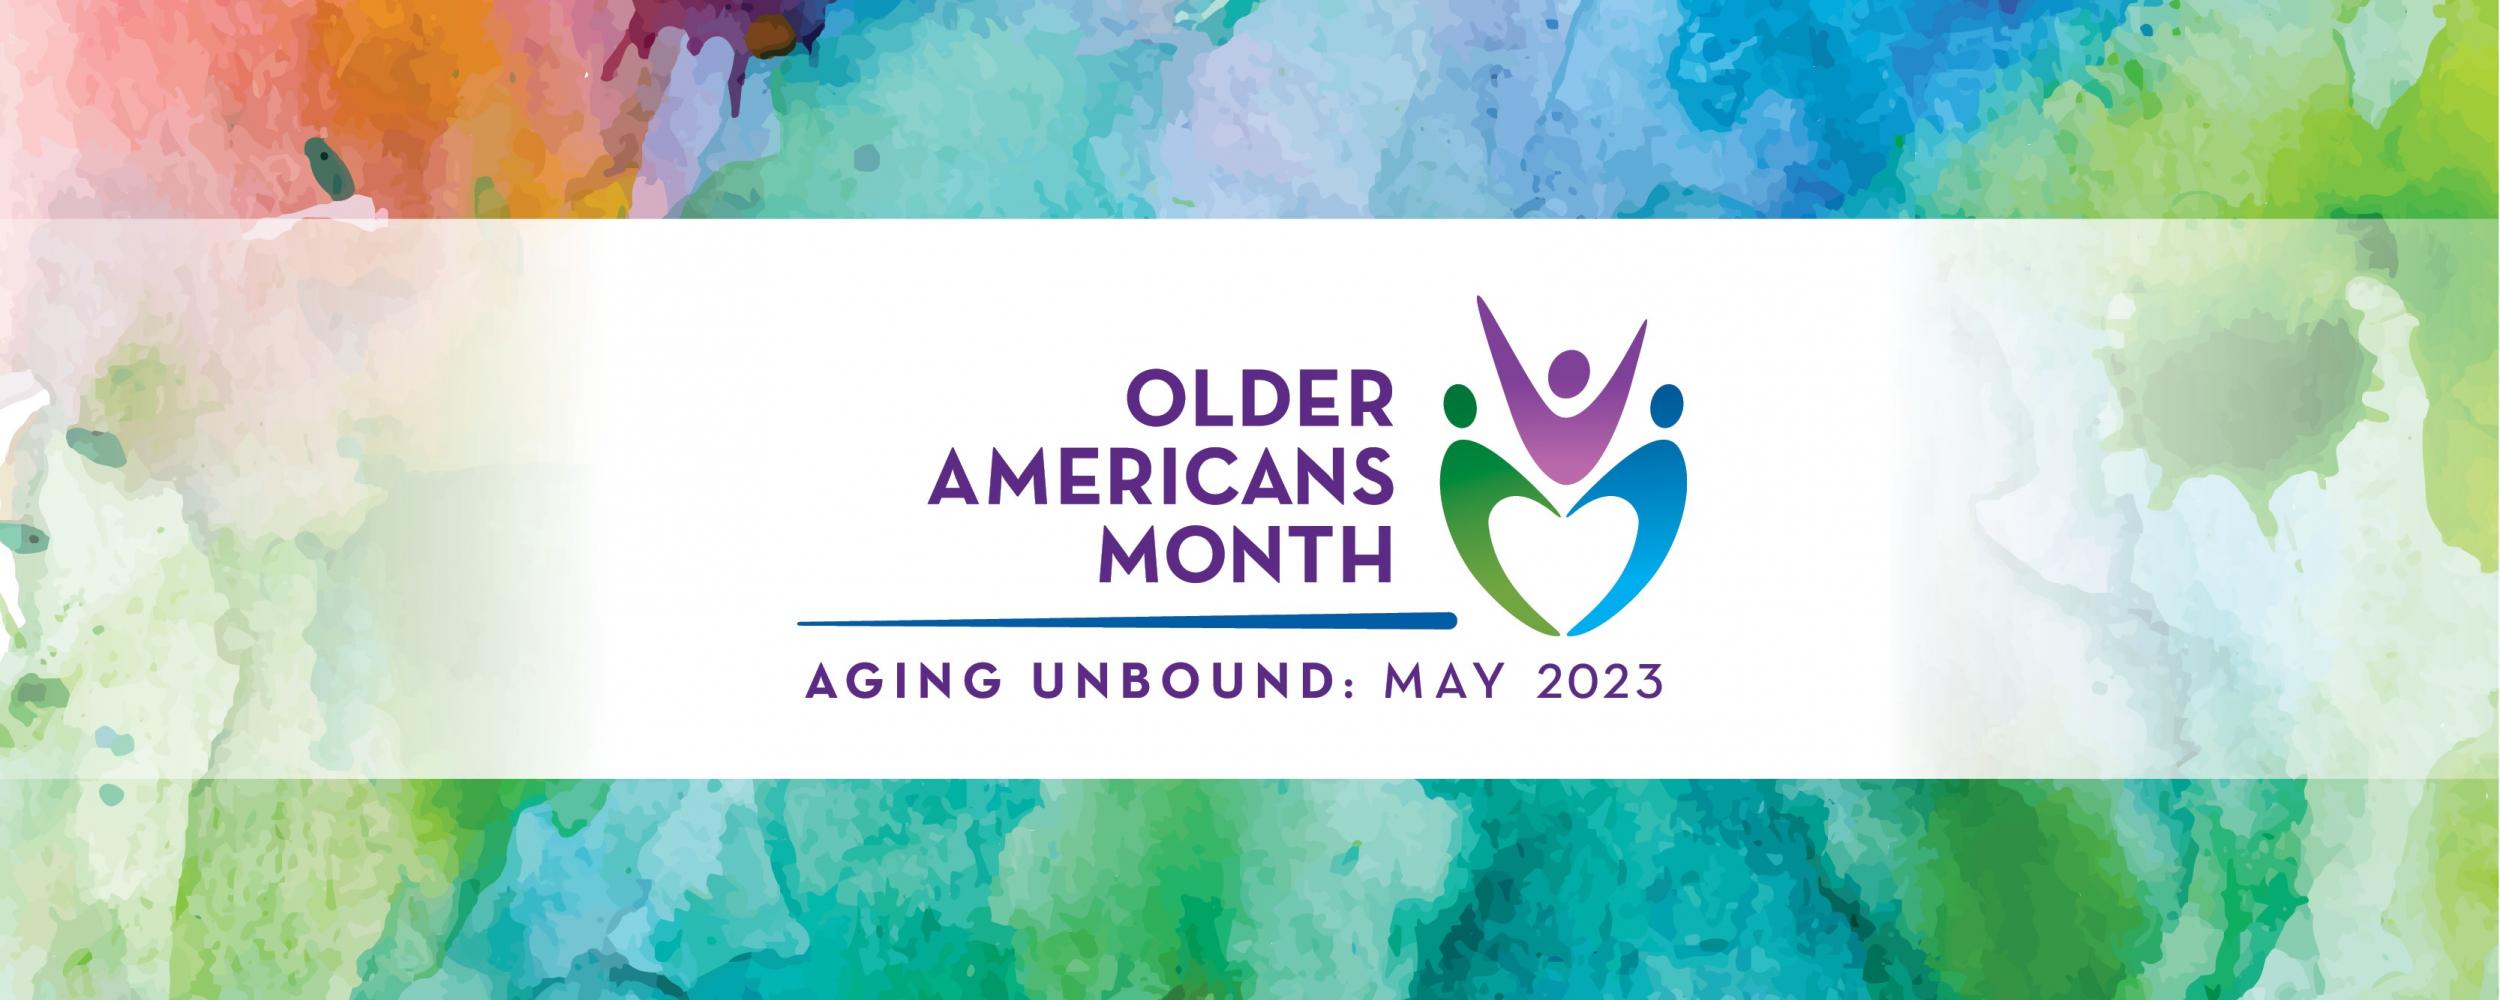 Older Americans Month AGING UNBOUND May 2023